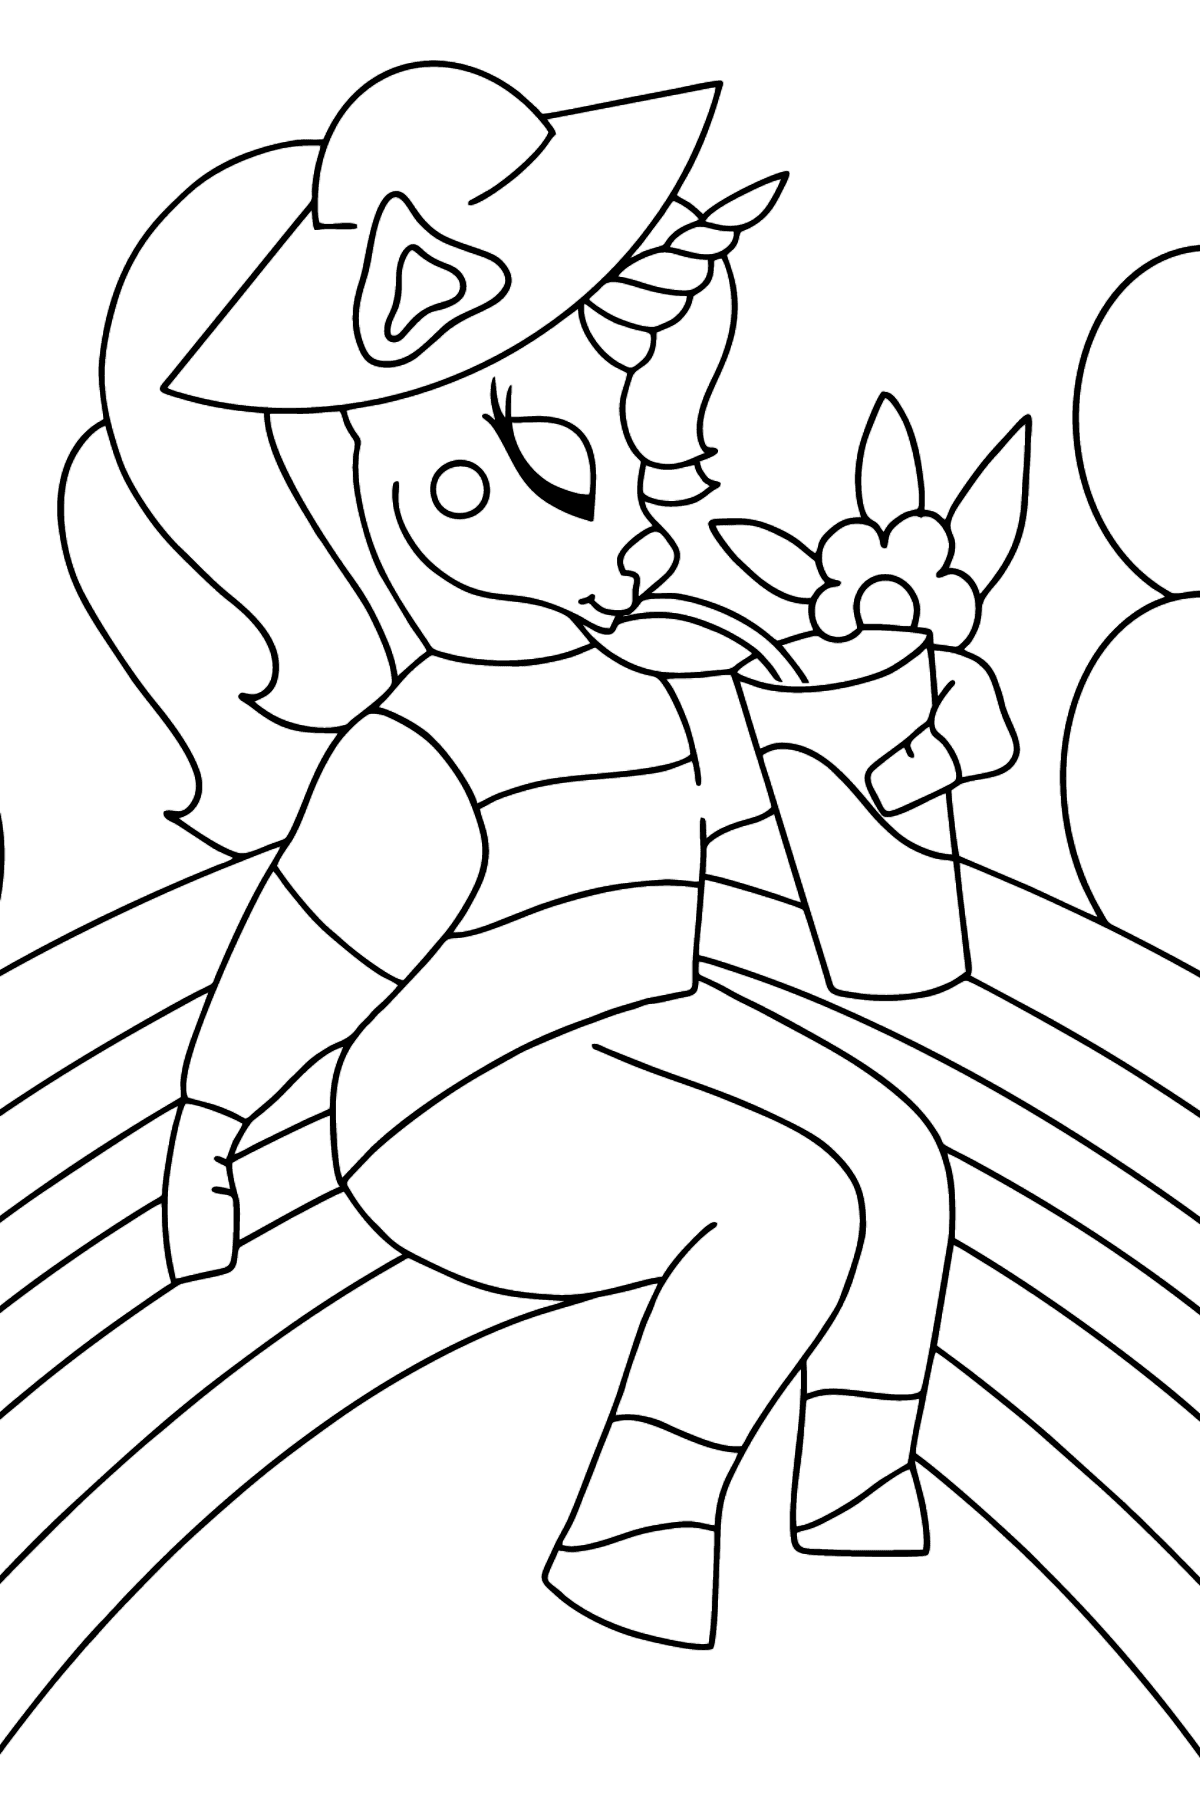 Rainbow Unicorn coloring page - Coloring Pages for Kids